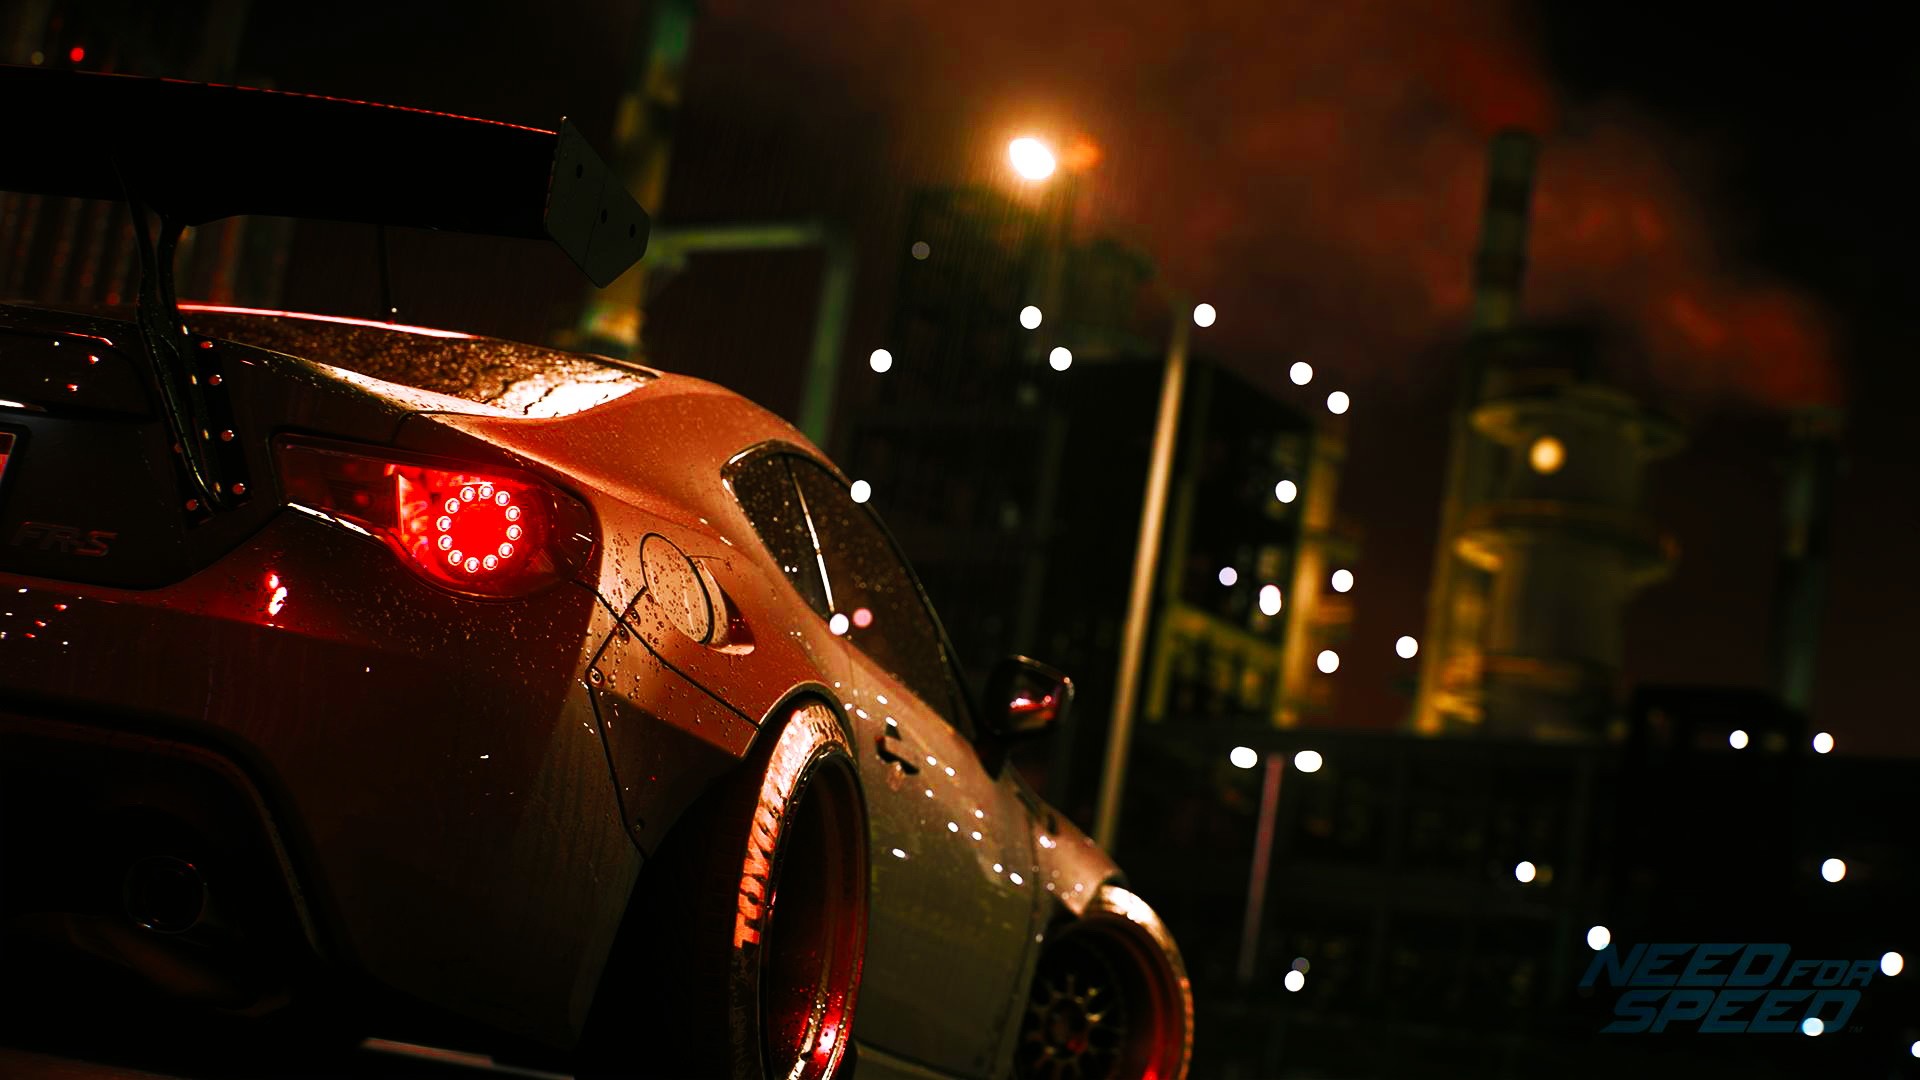 need for speed 2015 cars challenger